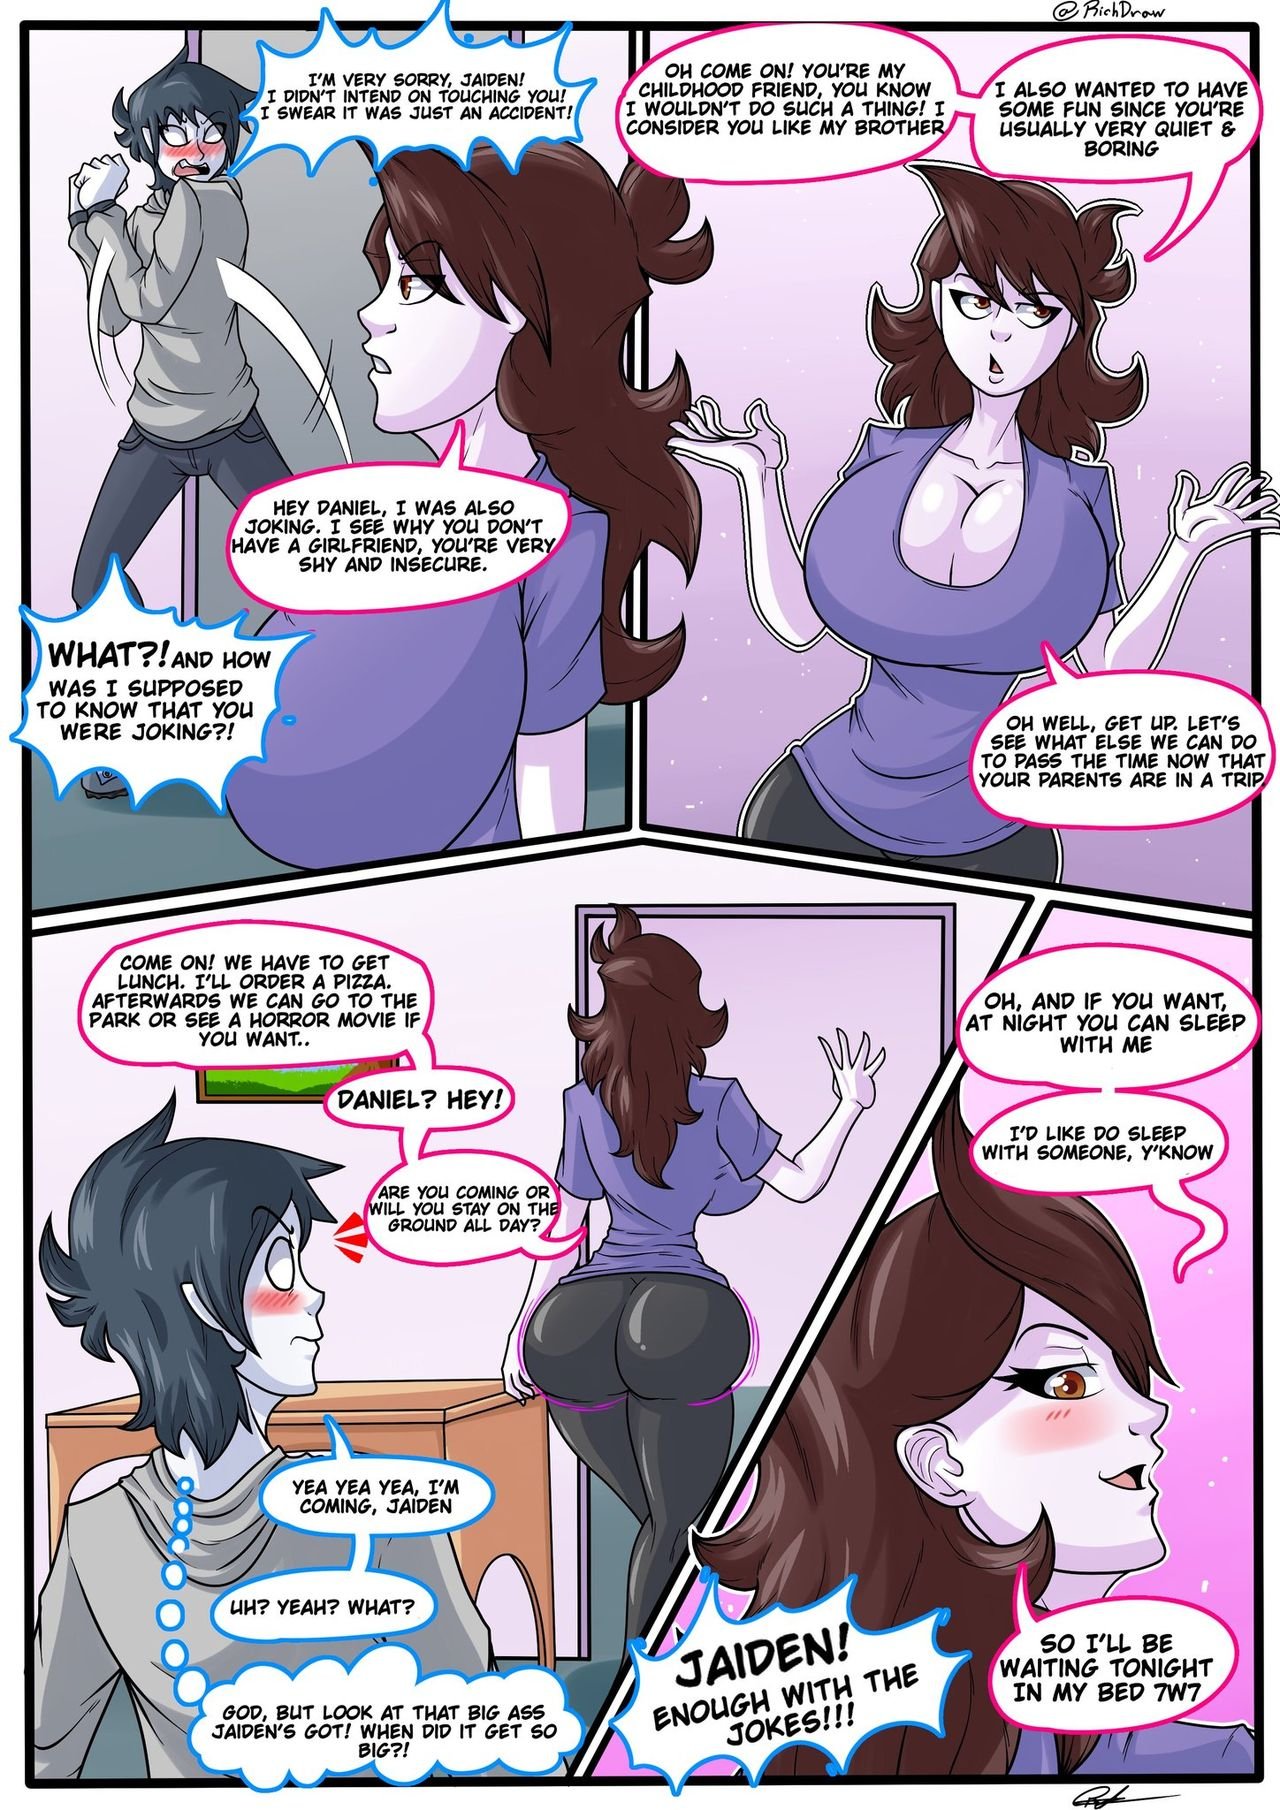 Caring For My Best Friend -Ongoing- comic porn HD Porn Comics image